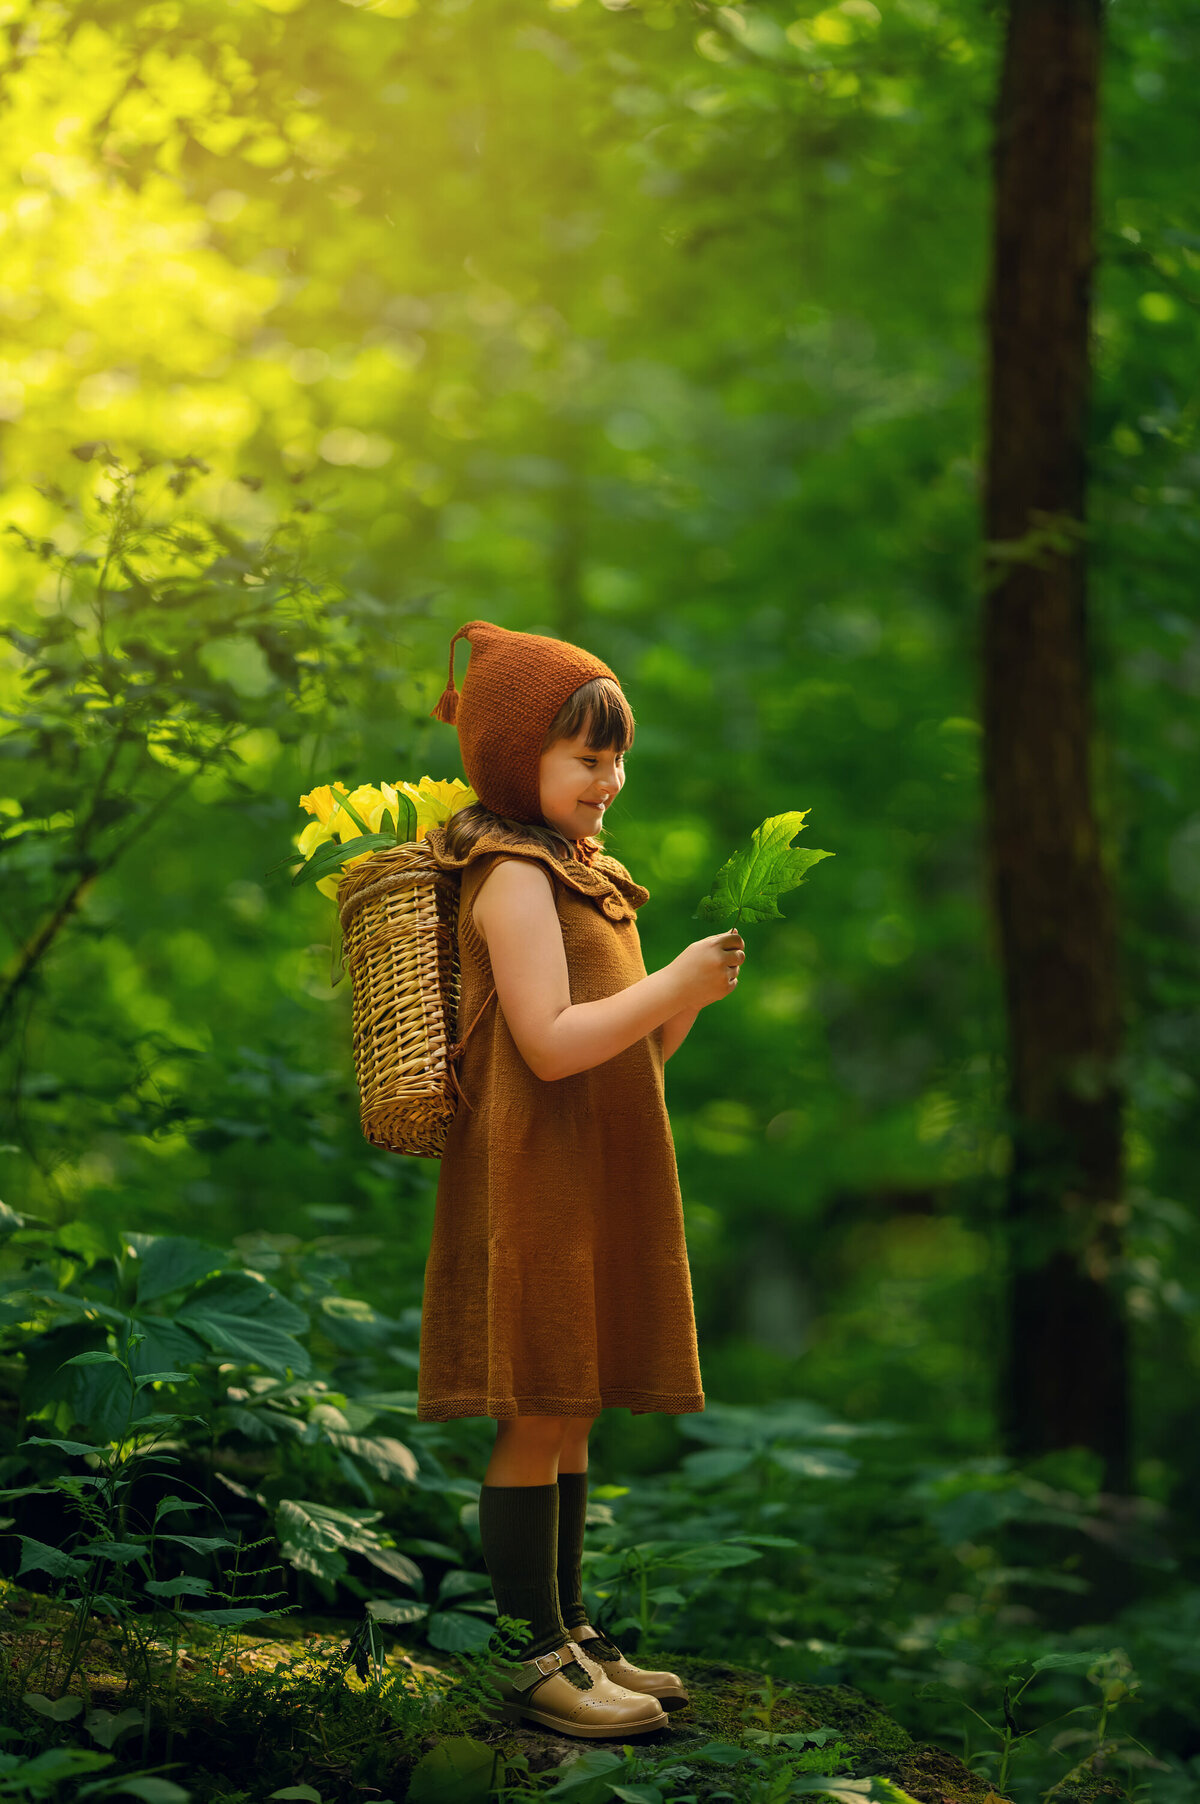 A young girl stands in a magical forest setting carrying a backpack of daffodils while being photographed by Kara Reese of Waukesha, WI.